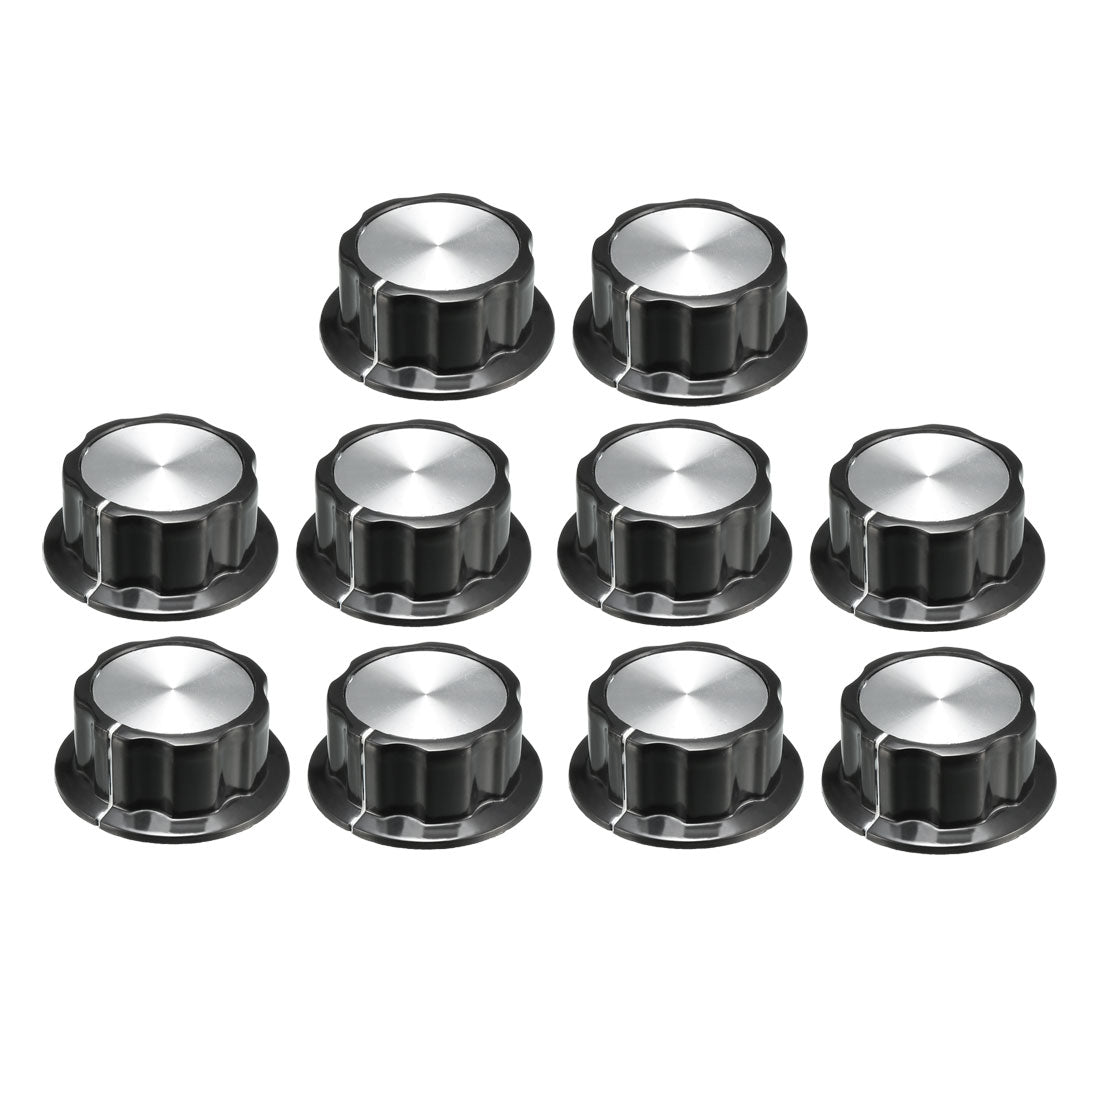 uxcell Uxcell 10Pcs 45x19.3mm Silver Tone Top Potentiometer Volume Control Rotary Knobs 6mm Shaft Hole